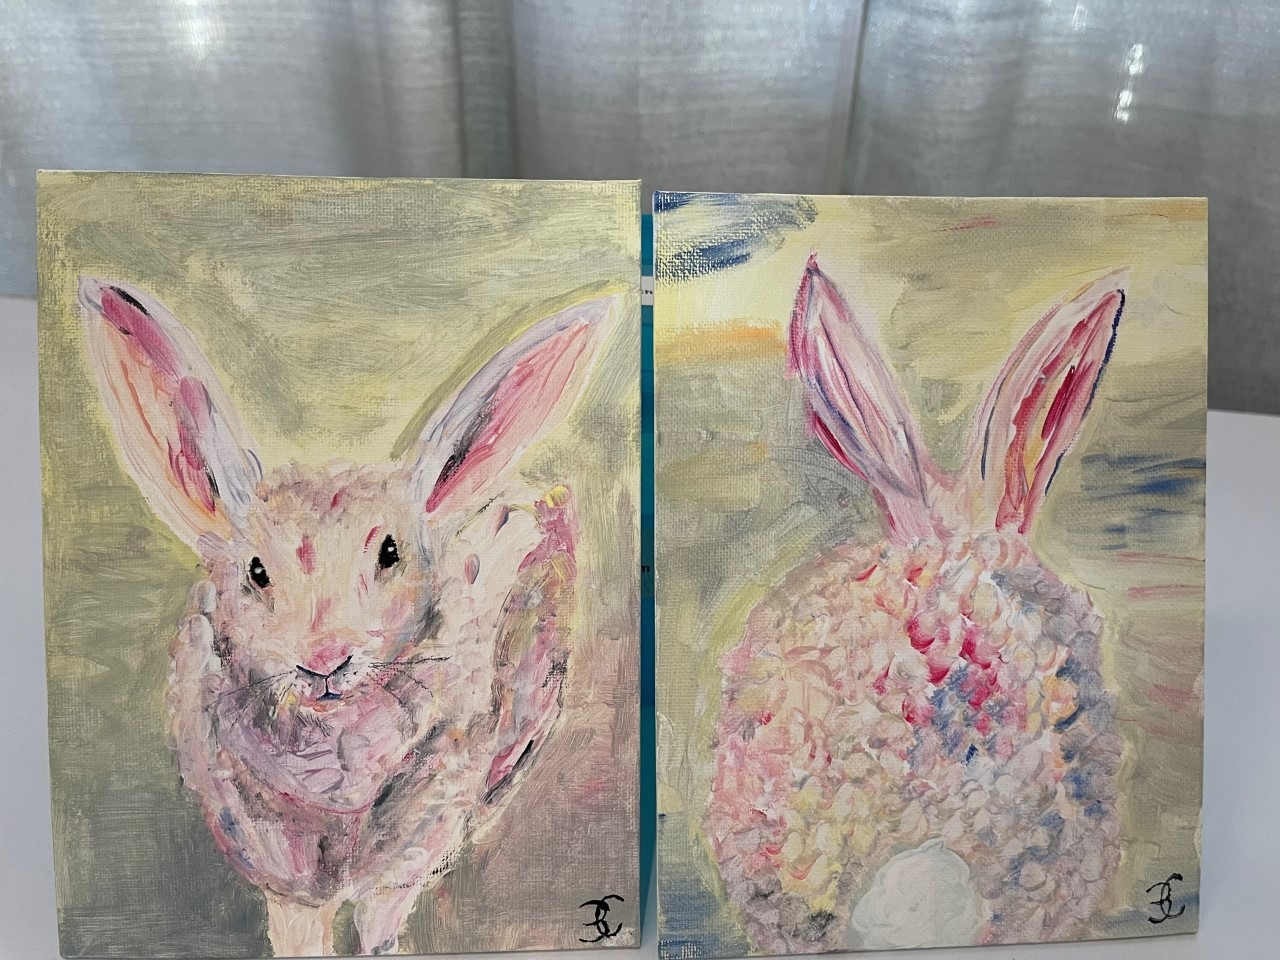 Set of Two Rabbit Paintings on Canvas. Artist: Corinna Beale.  Approx. 8 1/2" x 6" each.